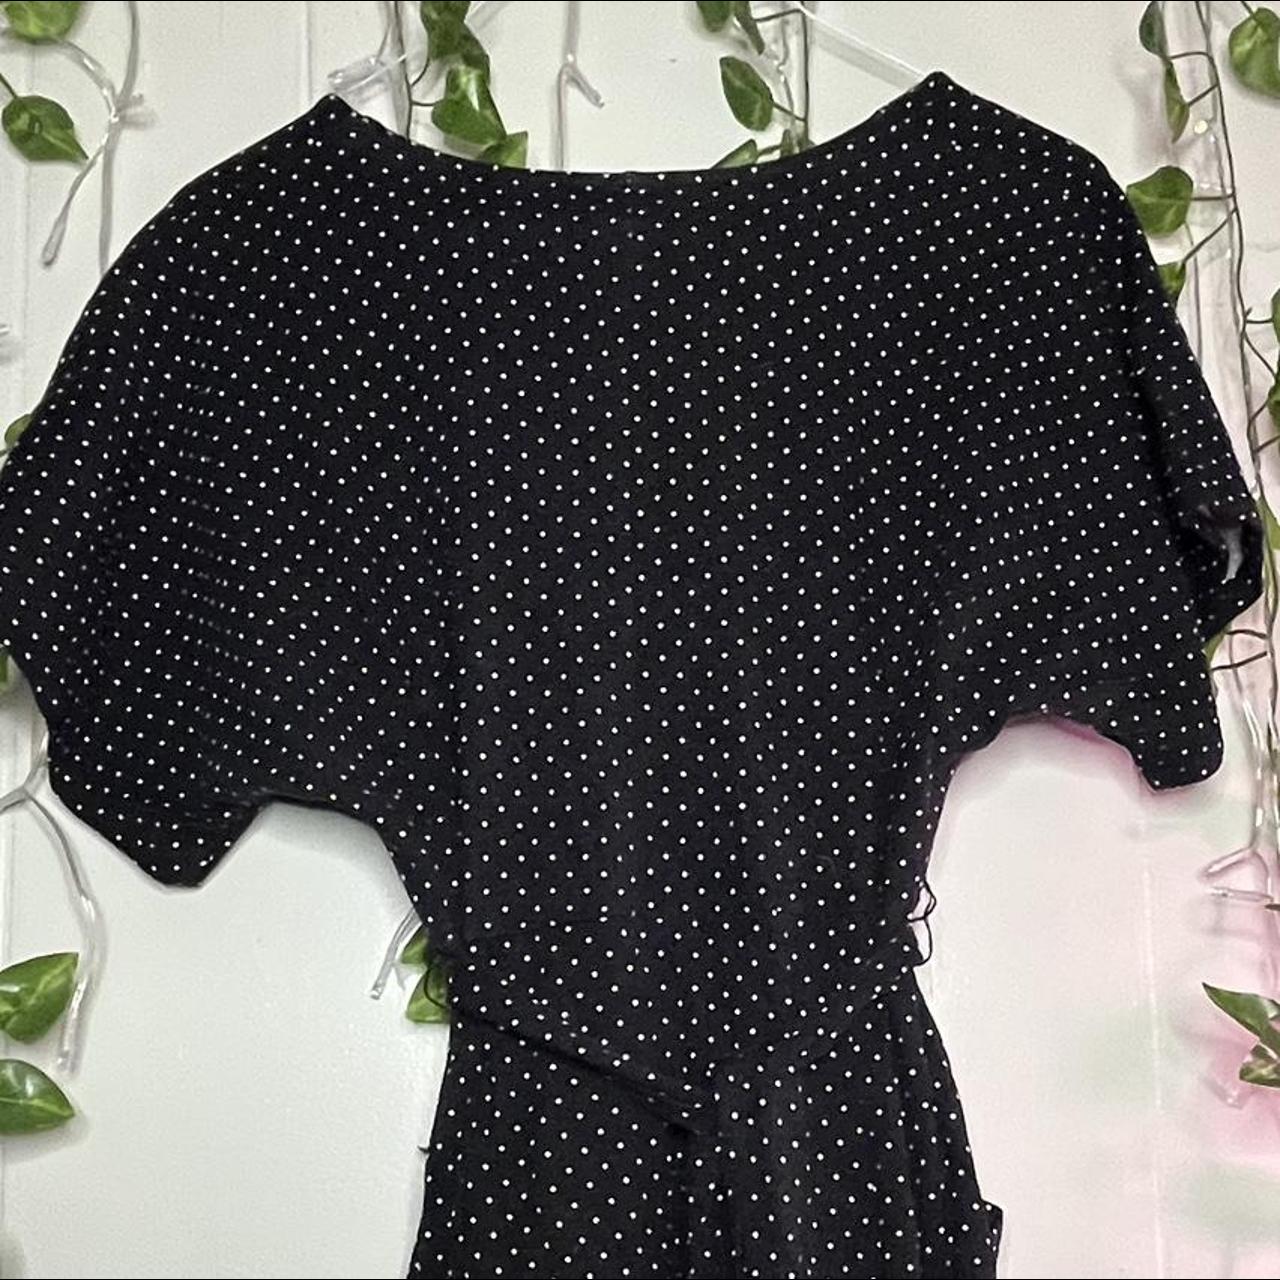 Stunning black and white polka dot dress by Who What... - Depop